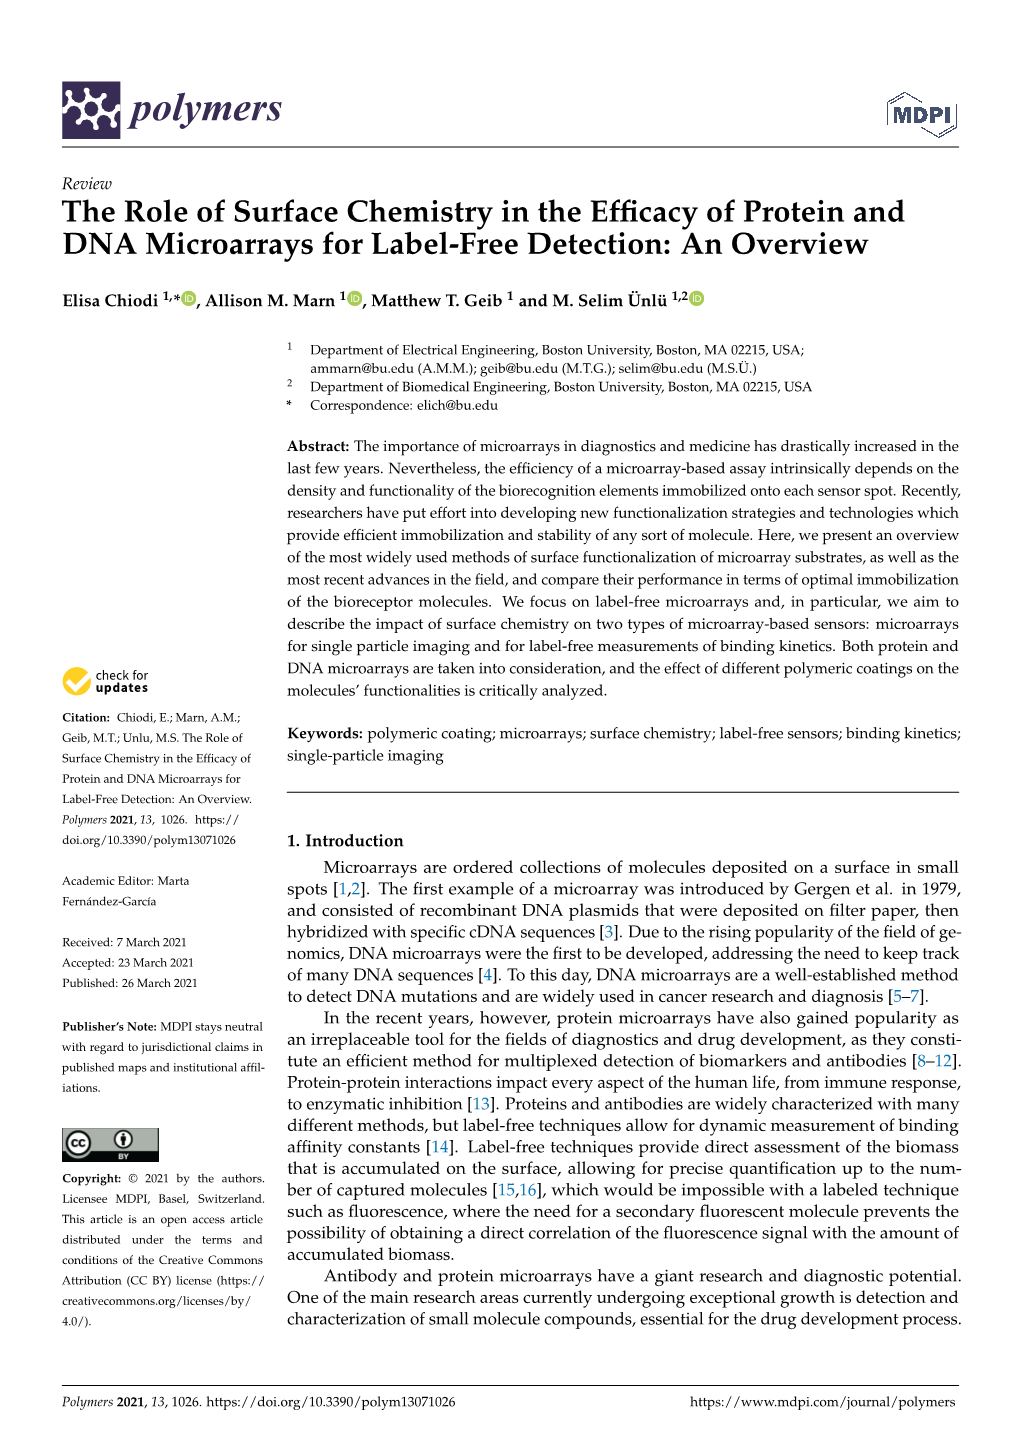 The Role of Surface Chemistry in the Efficacy of Protein and DNA Microarrays for Label-Free Detection: an Overview